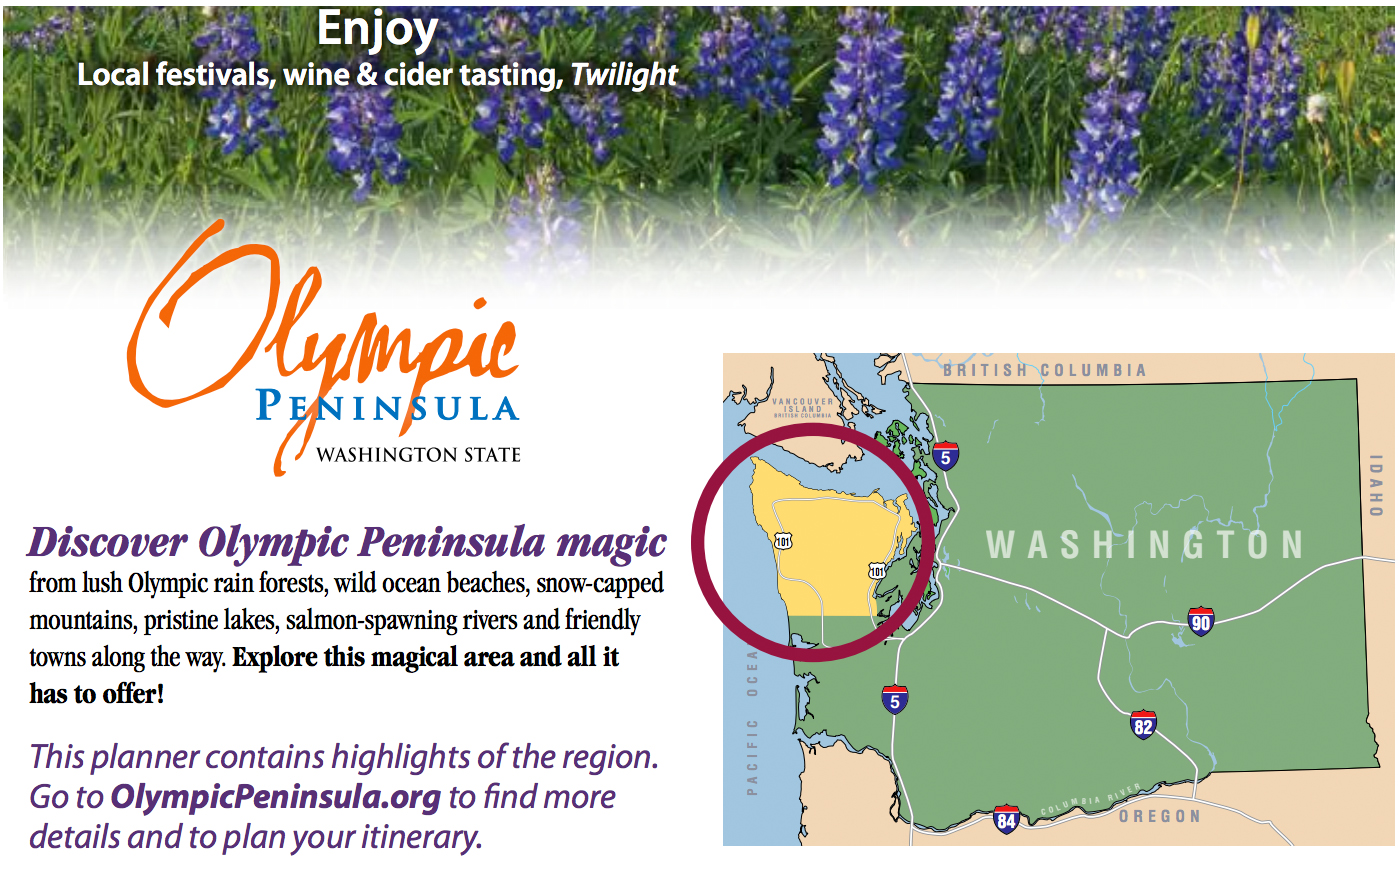 2017 Travel Planner for Olympic Peninsula Now Available